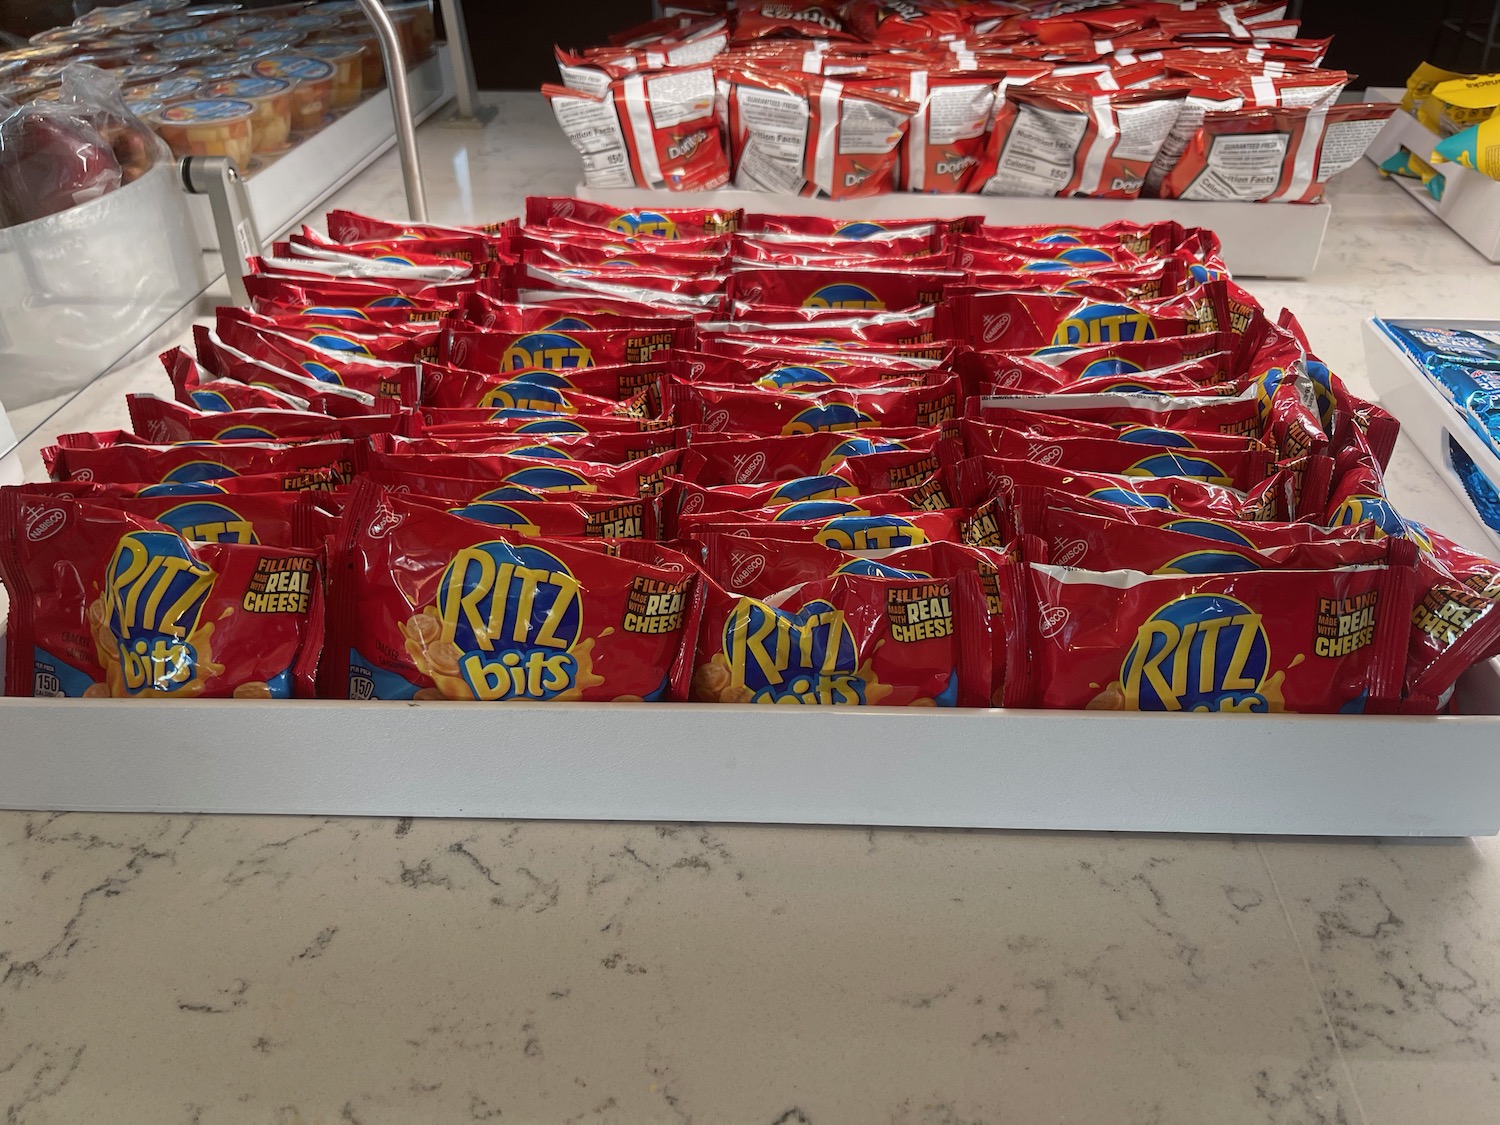 a group of red bags of potato chips